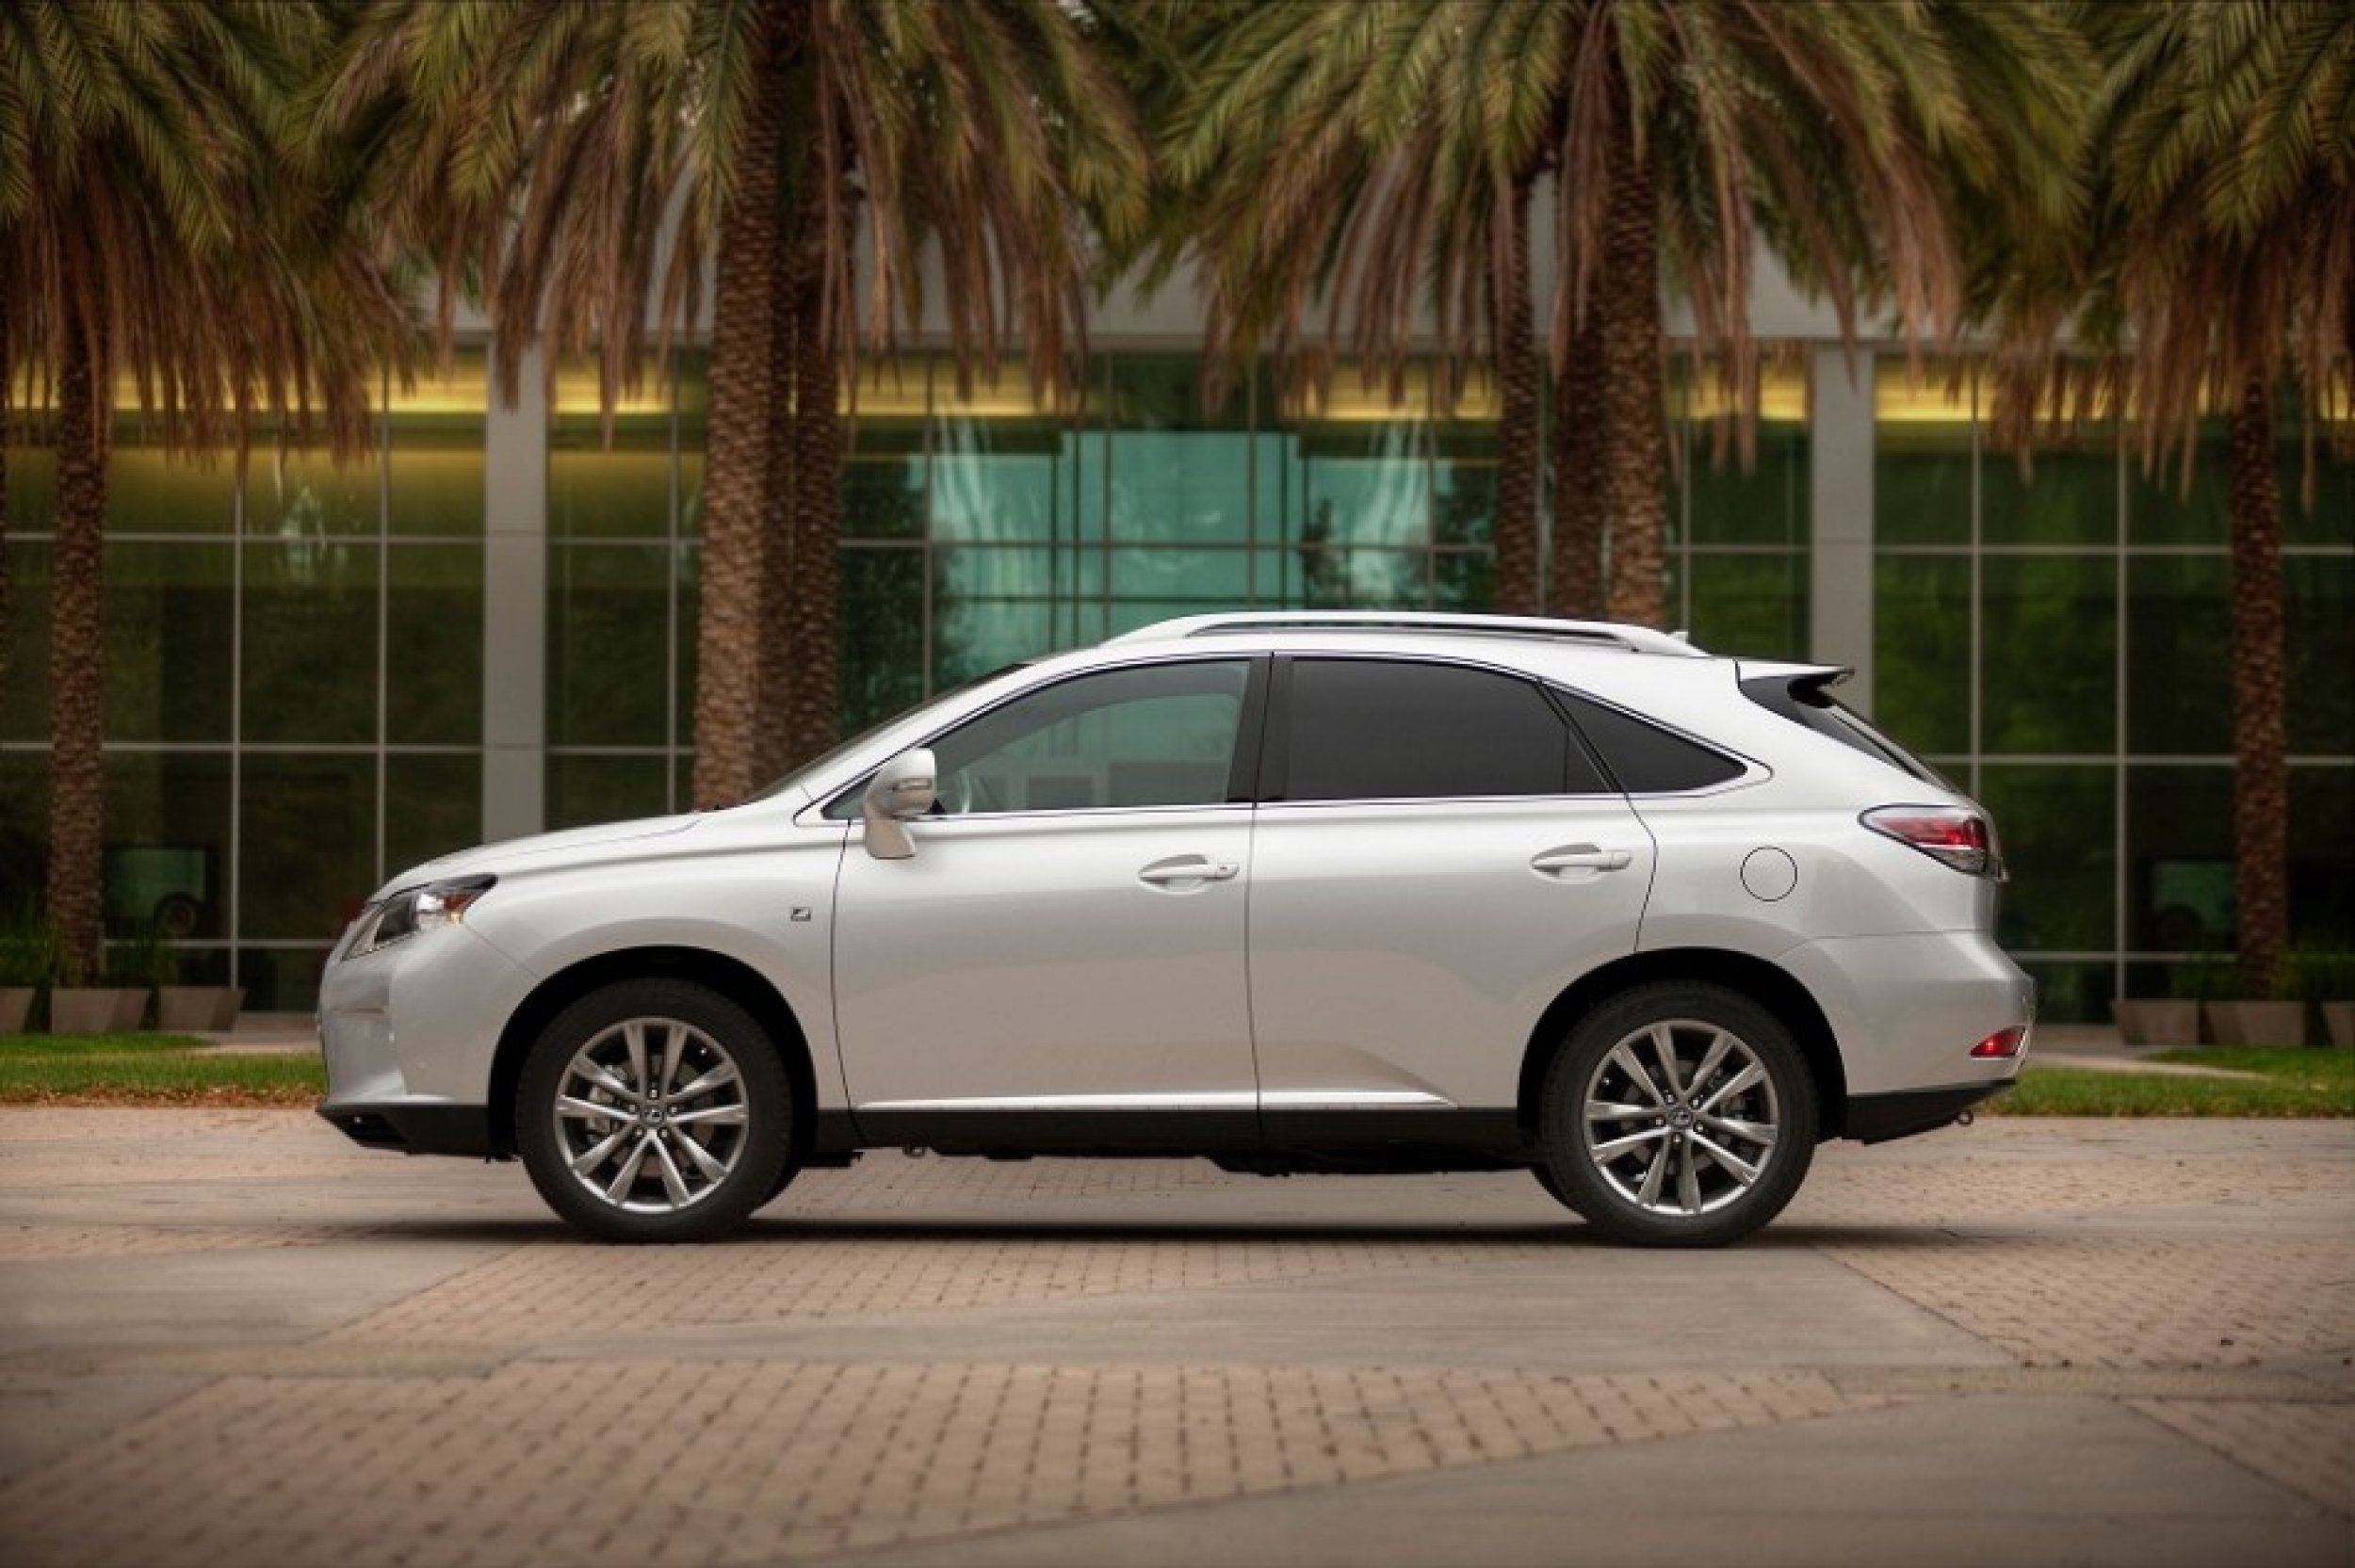 The 4 car in Americas wealthiest zip codes is the Lexus RX with an MSRP of 39,950.